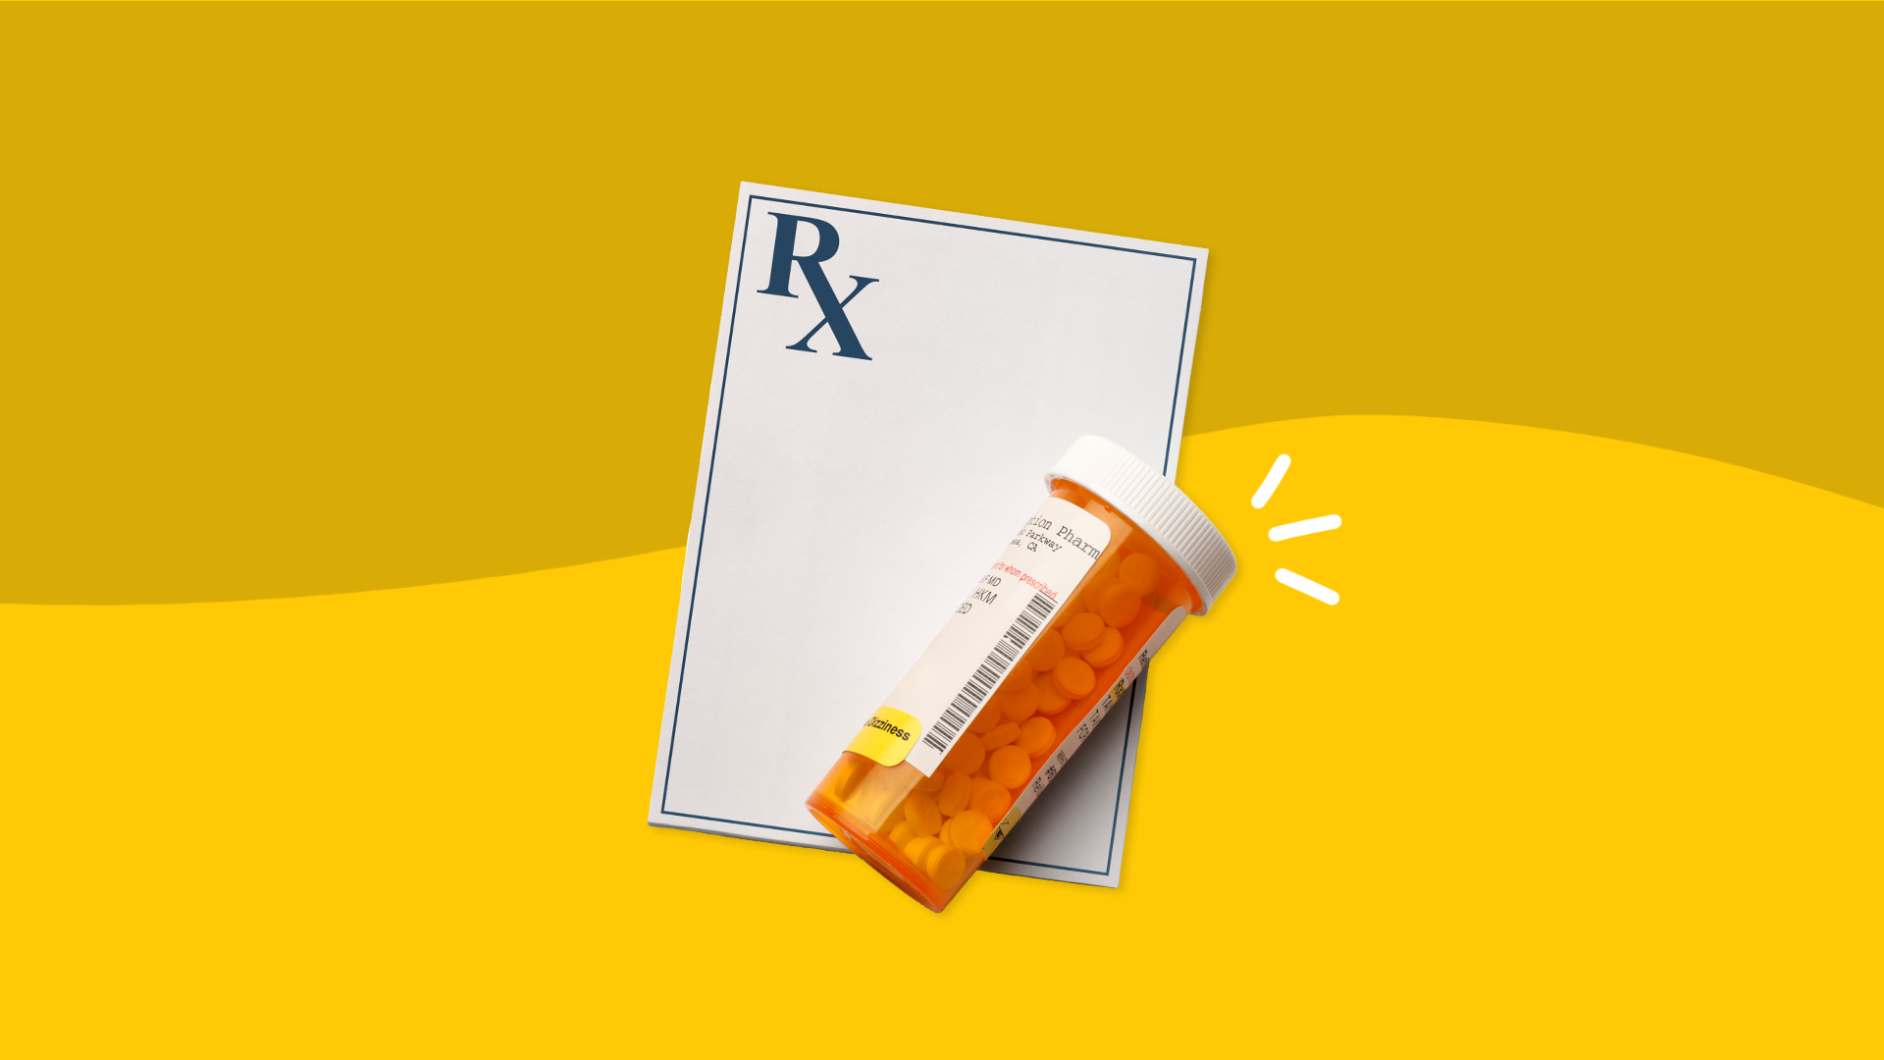 Prescription pad with pill bottle: Jardiance side effects and how to avoid them